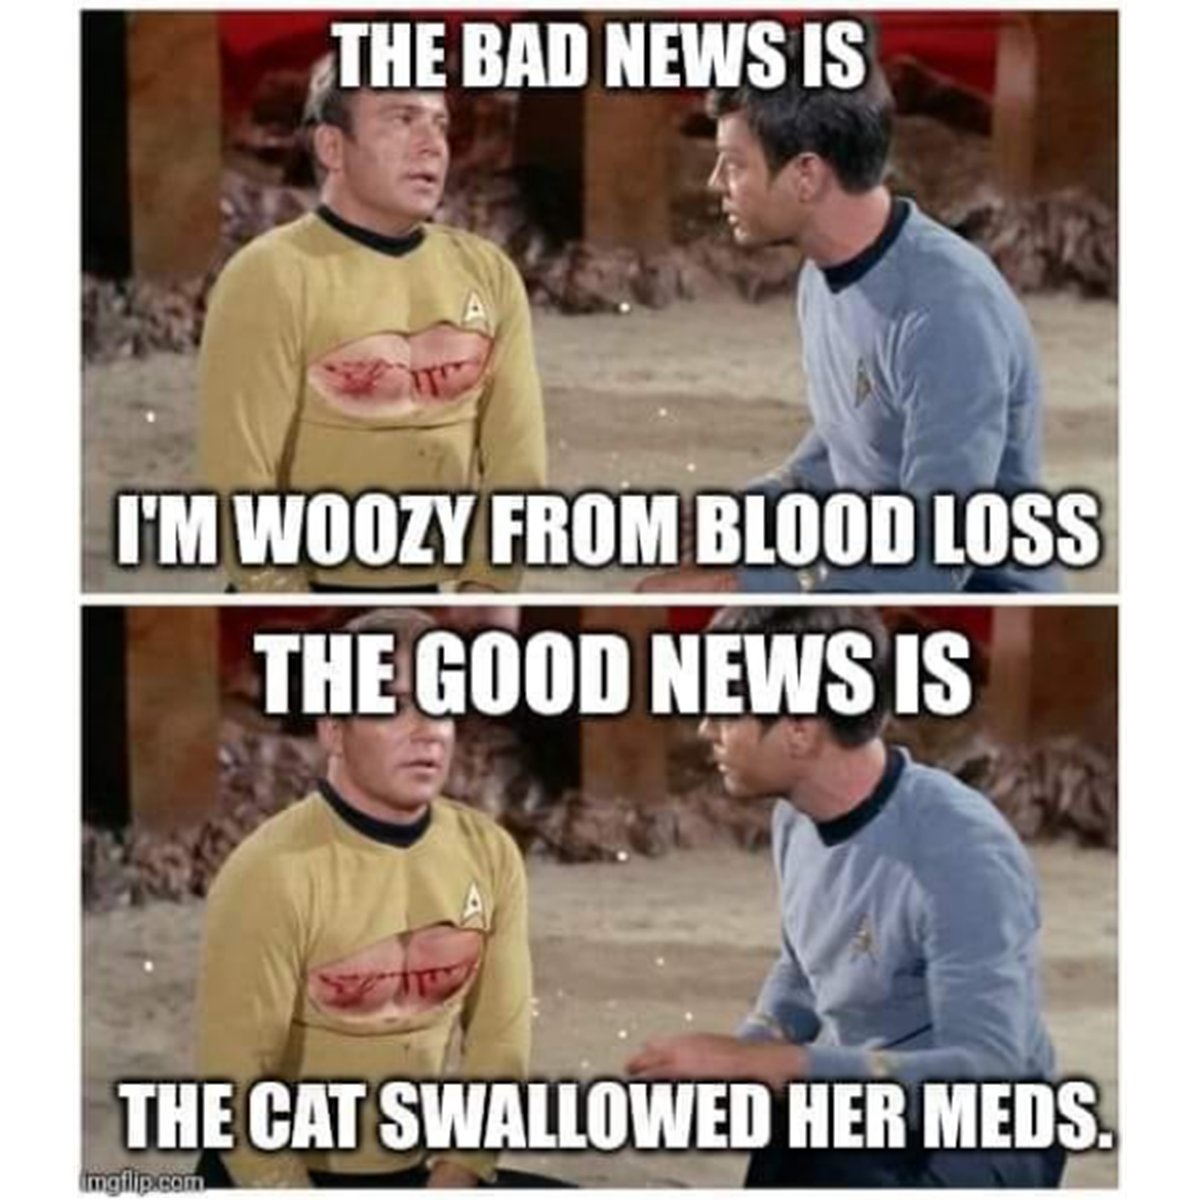 photo caption - The Bad News Is I'M Woozy From Blood Loss The Good News Is The Cat Swallowed Her Meds. mglip.com